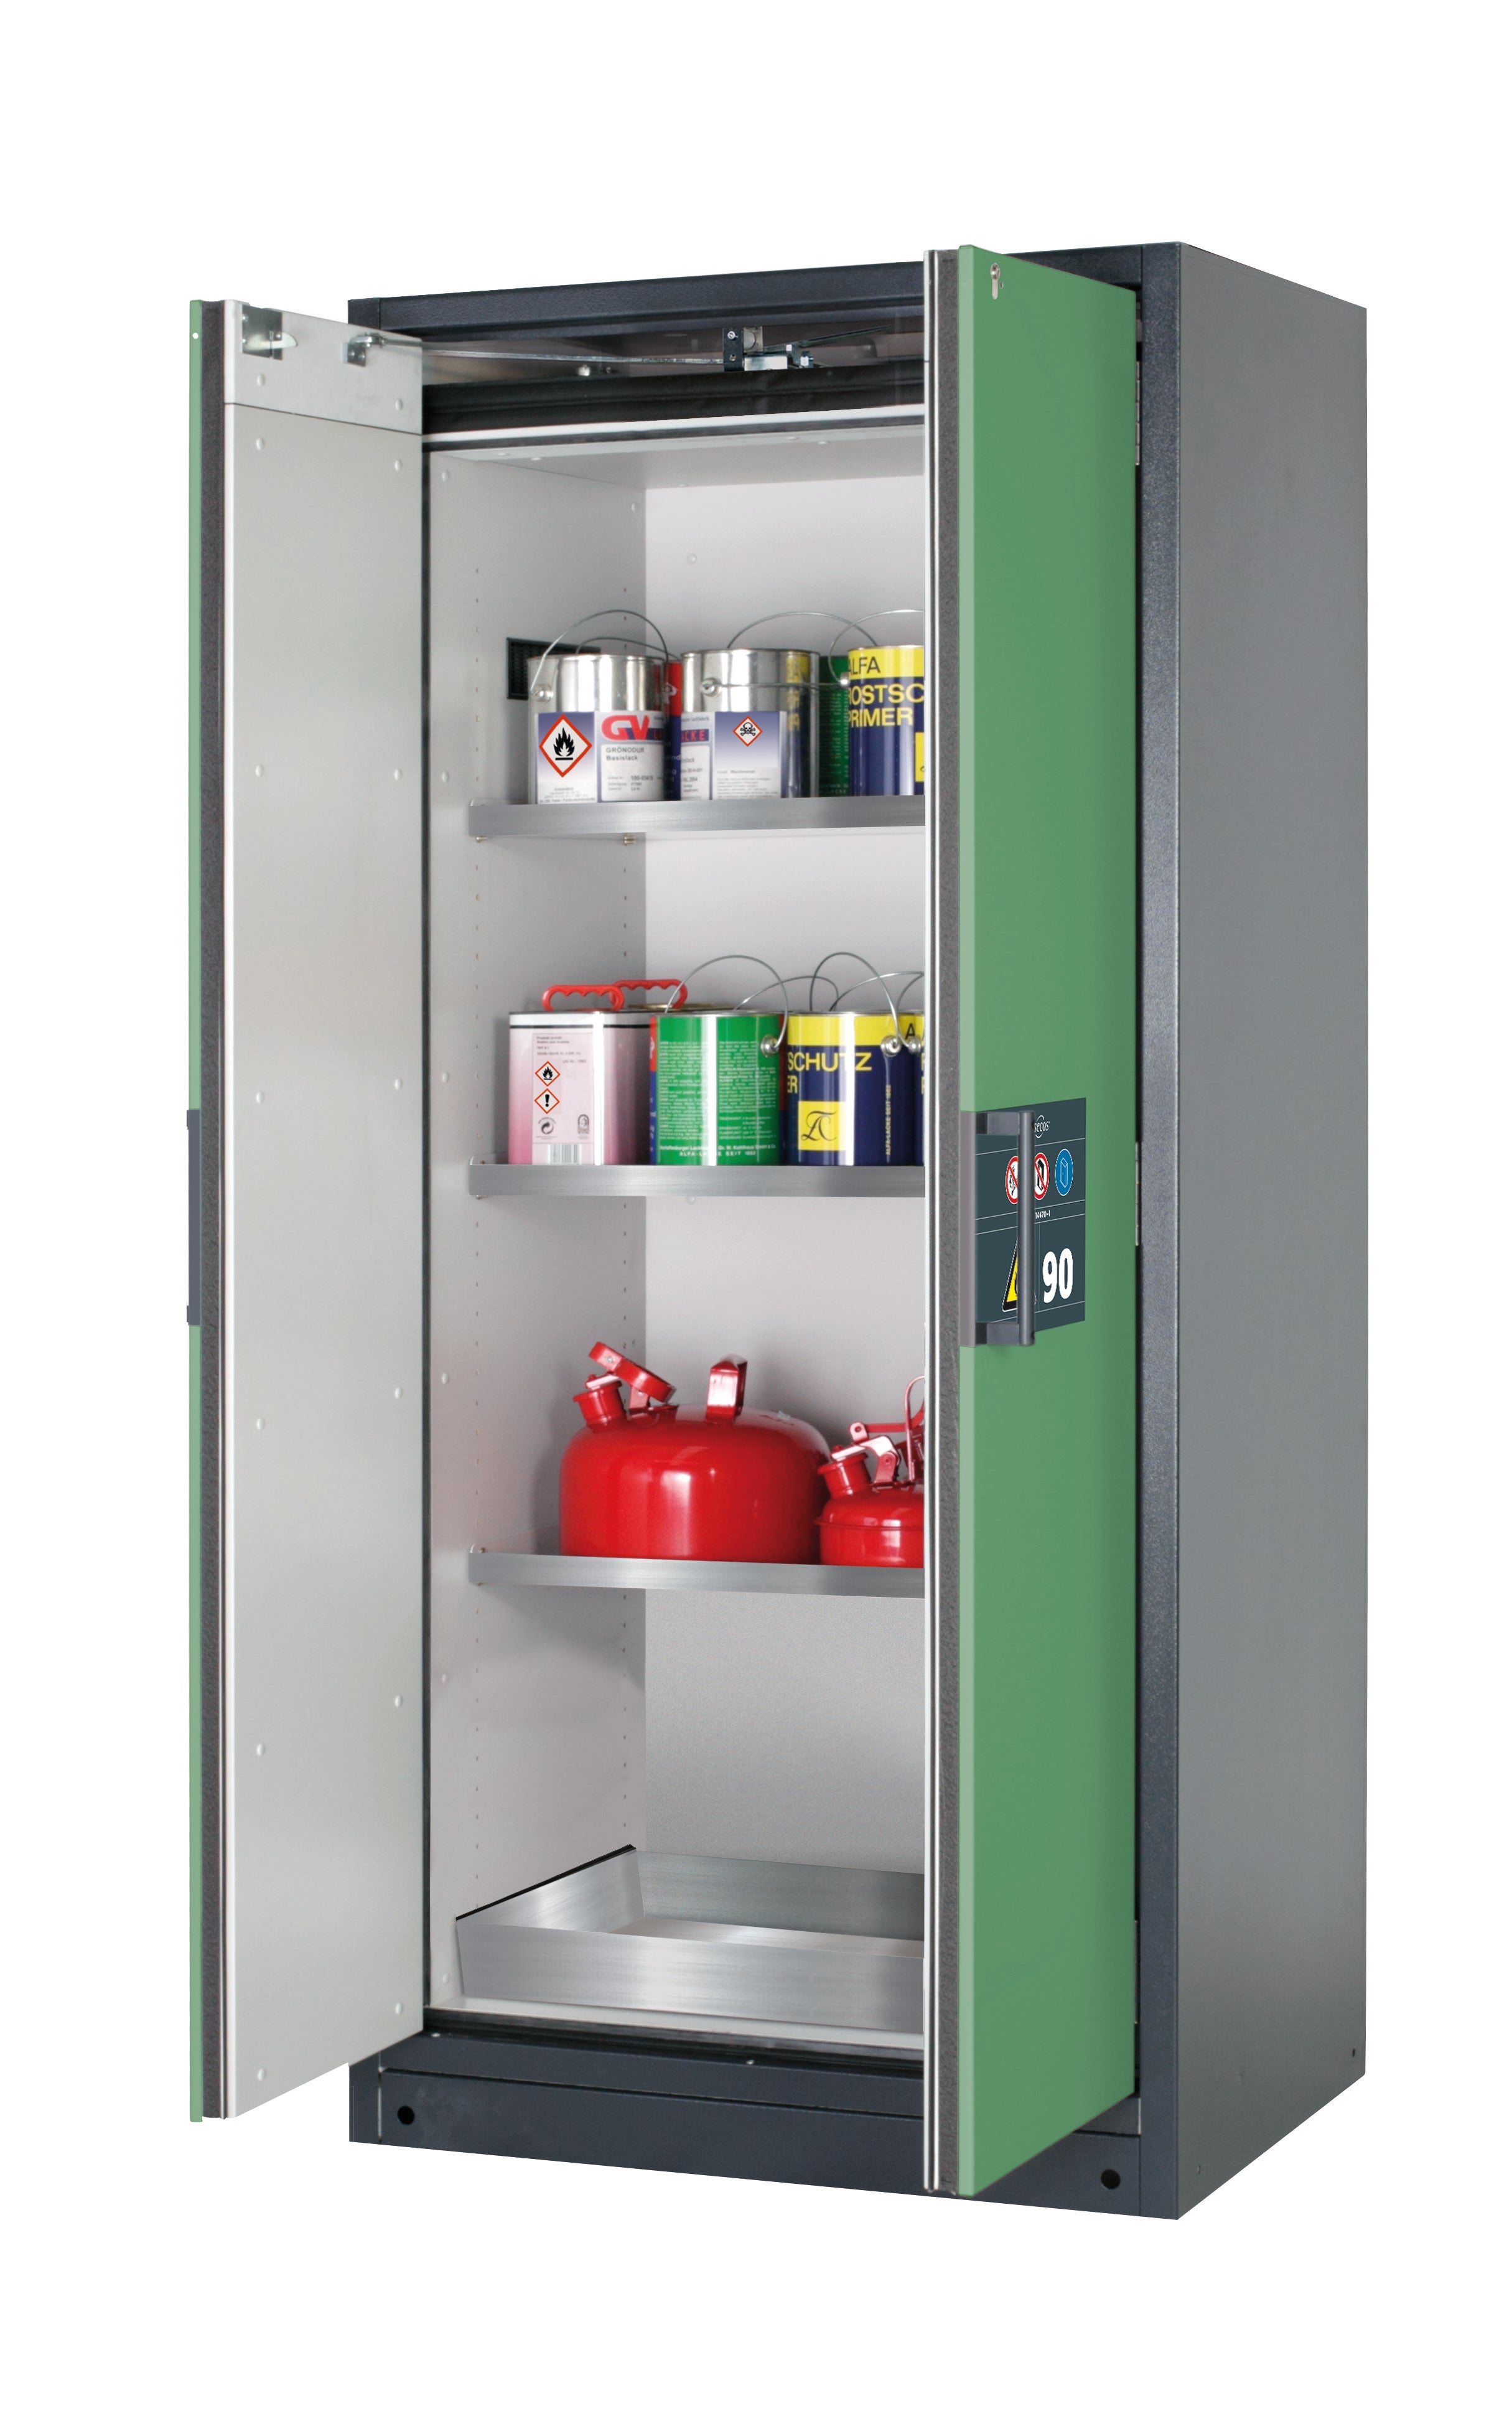 Type 90 safety storage cabinet Q-PEGASUS-90 model Q90.195.090.WDAC in reseda green RAL 6011 with 3x shelf standard (stainless steel 1.4301),